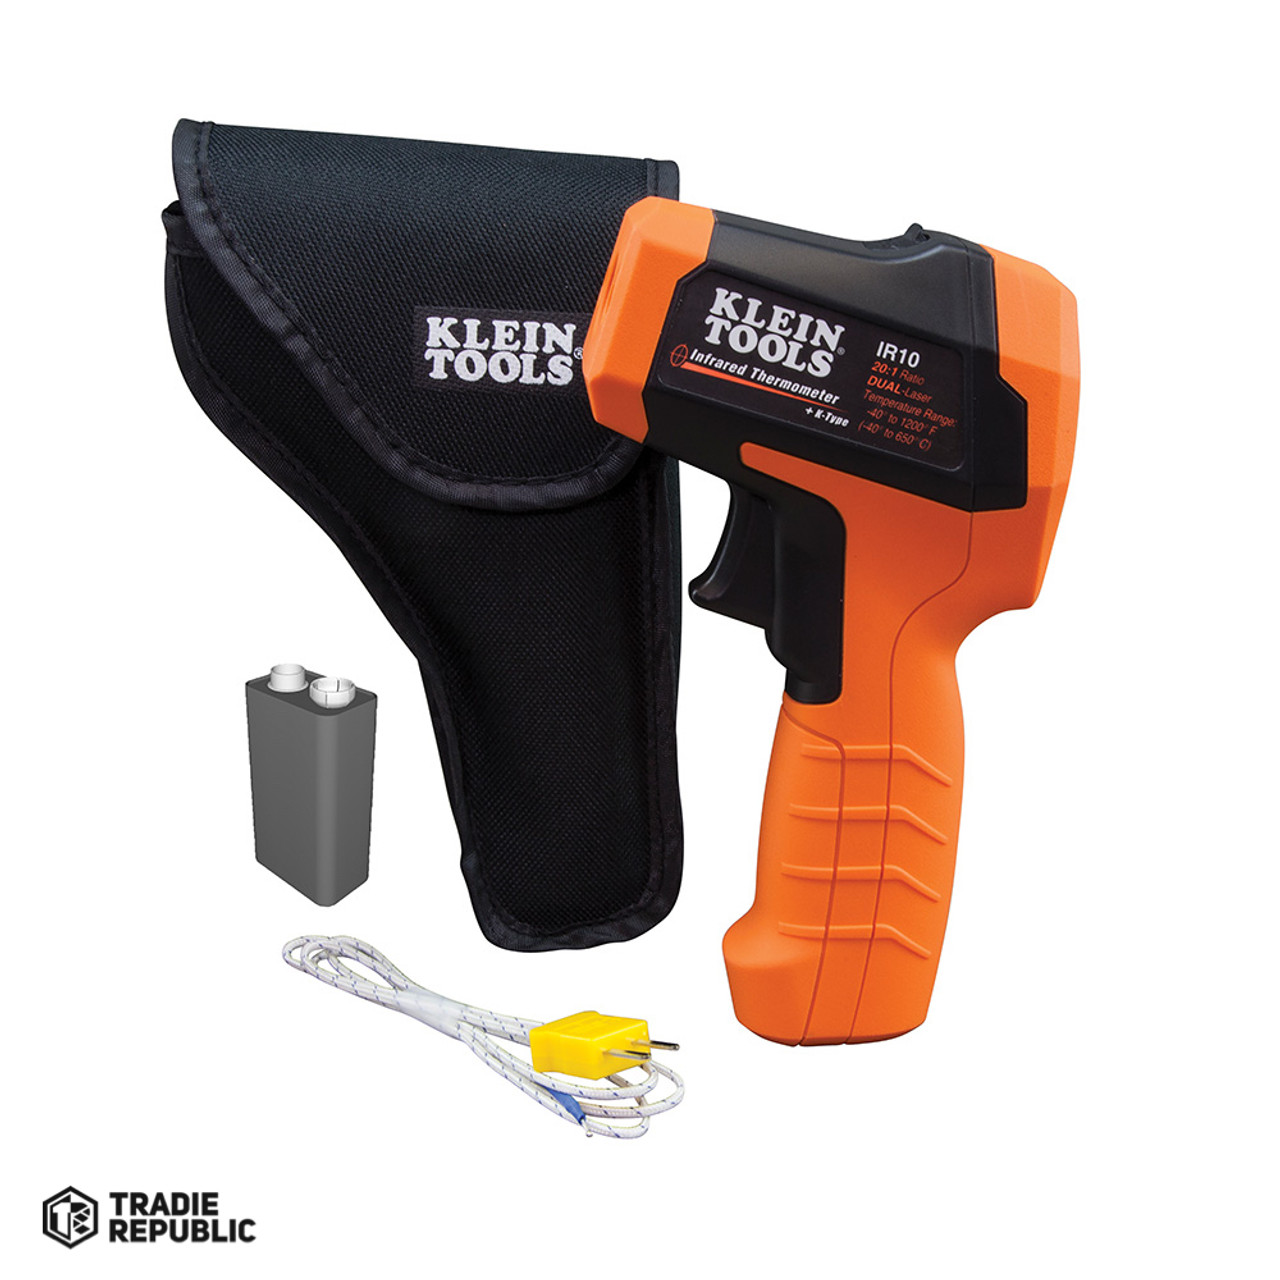 A-IR10 Klein Dual Laser Infrared Thermometer 20:1